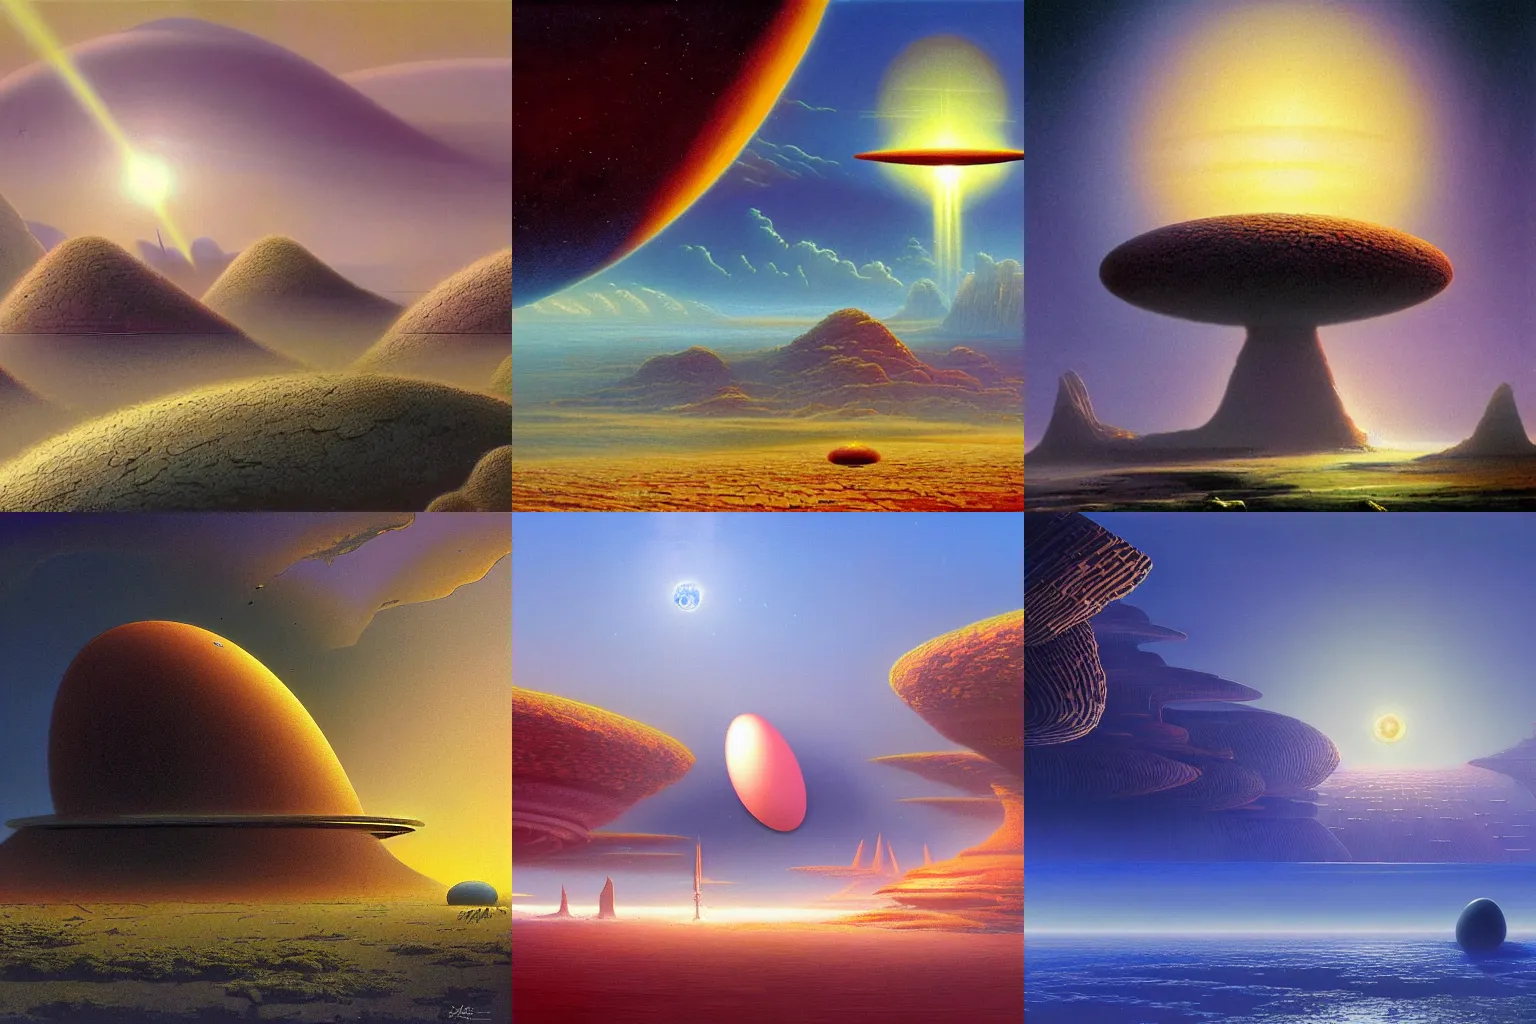 Prompt: Digital painting of an extraterrestrial landscape with a futuristic egg-building in the distance by Bruce Pennington